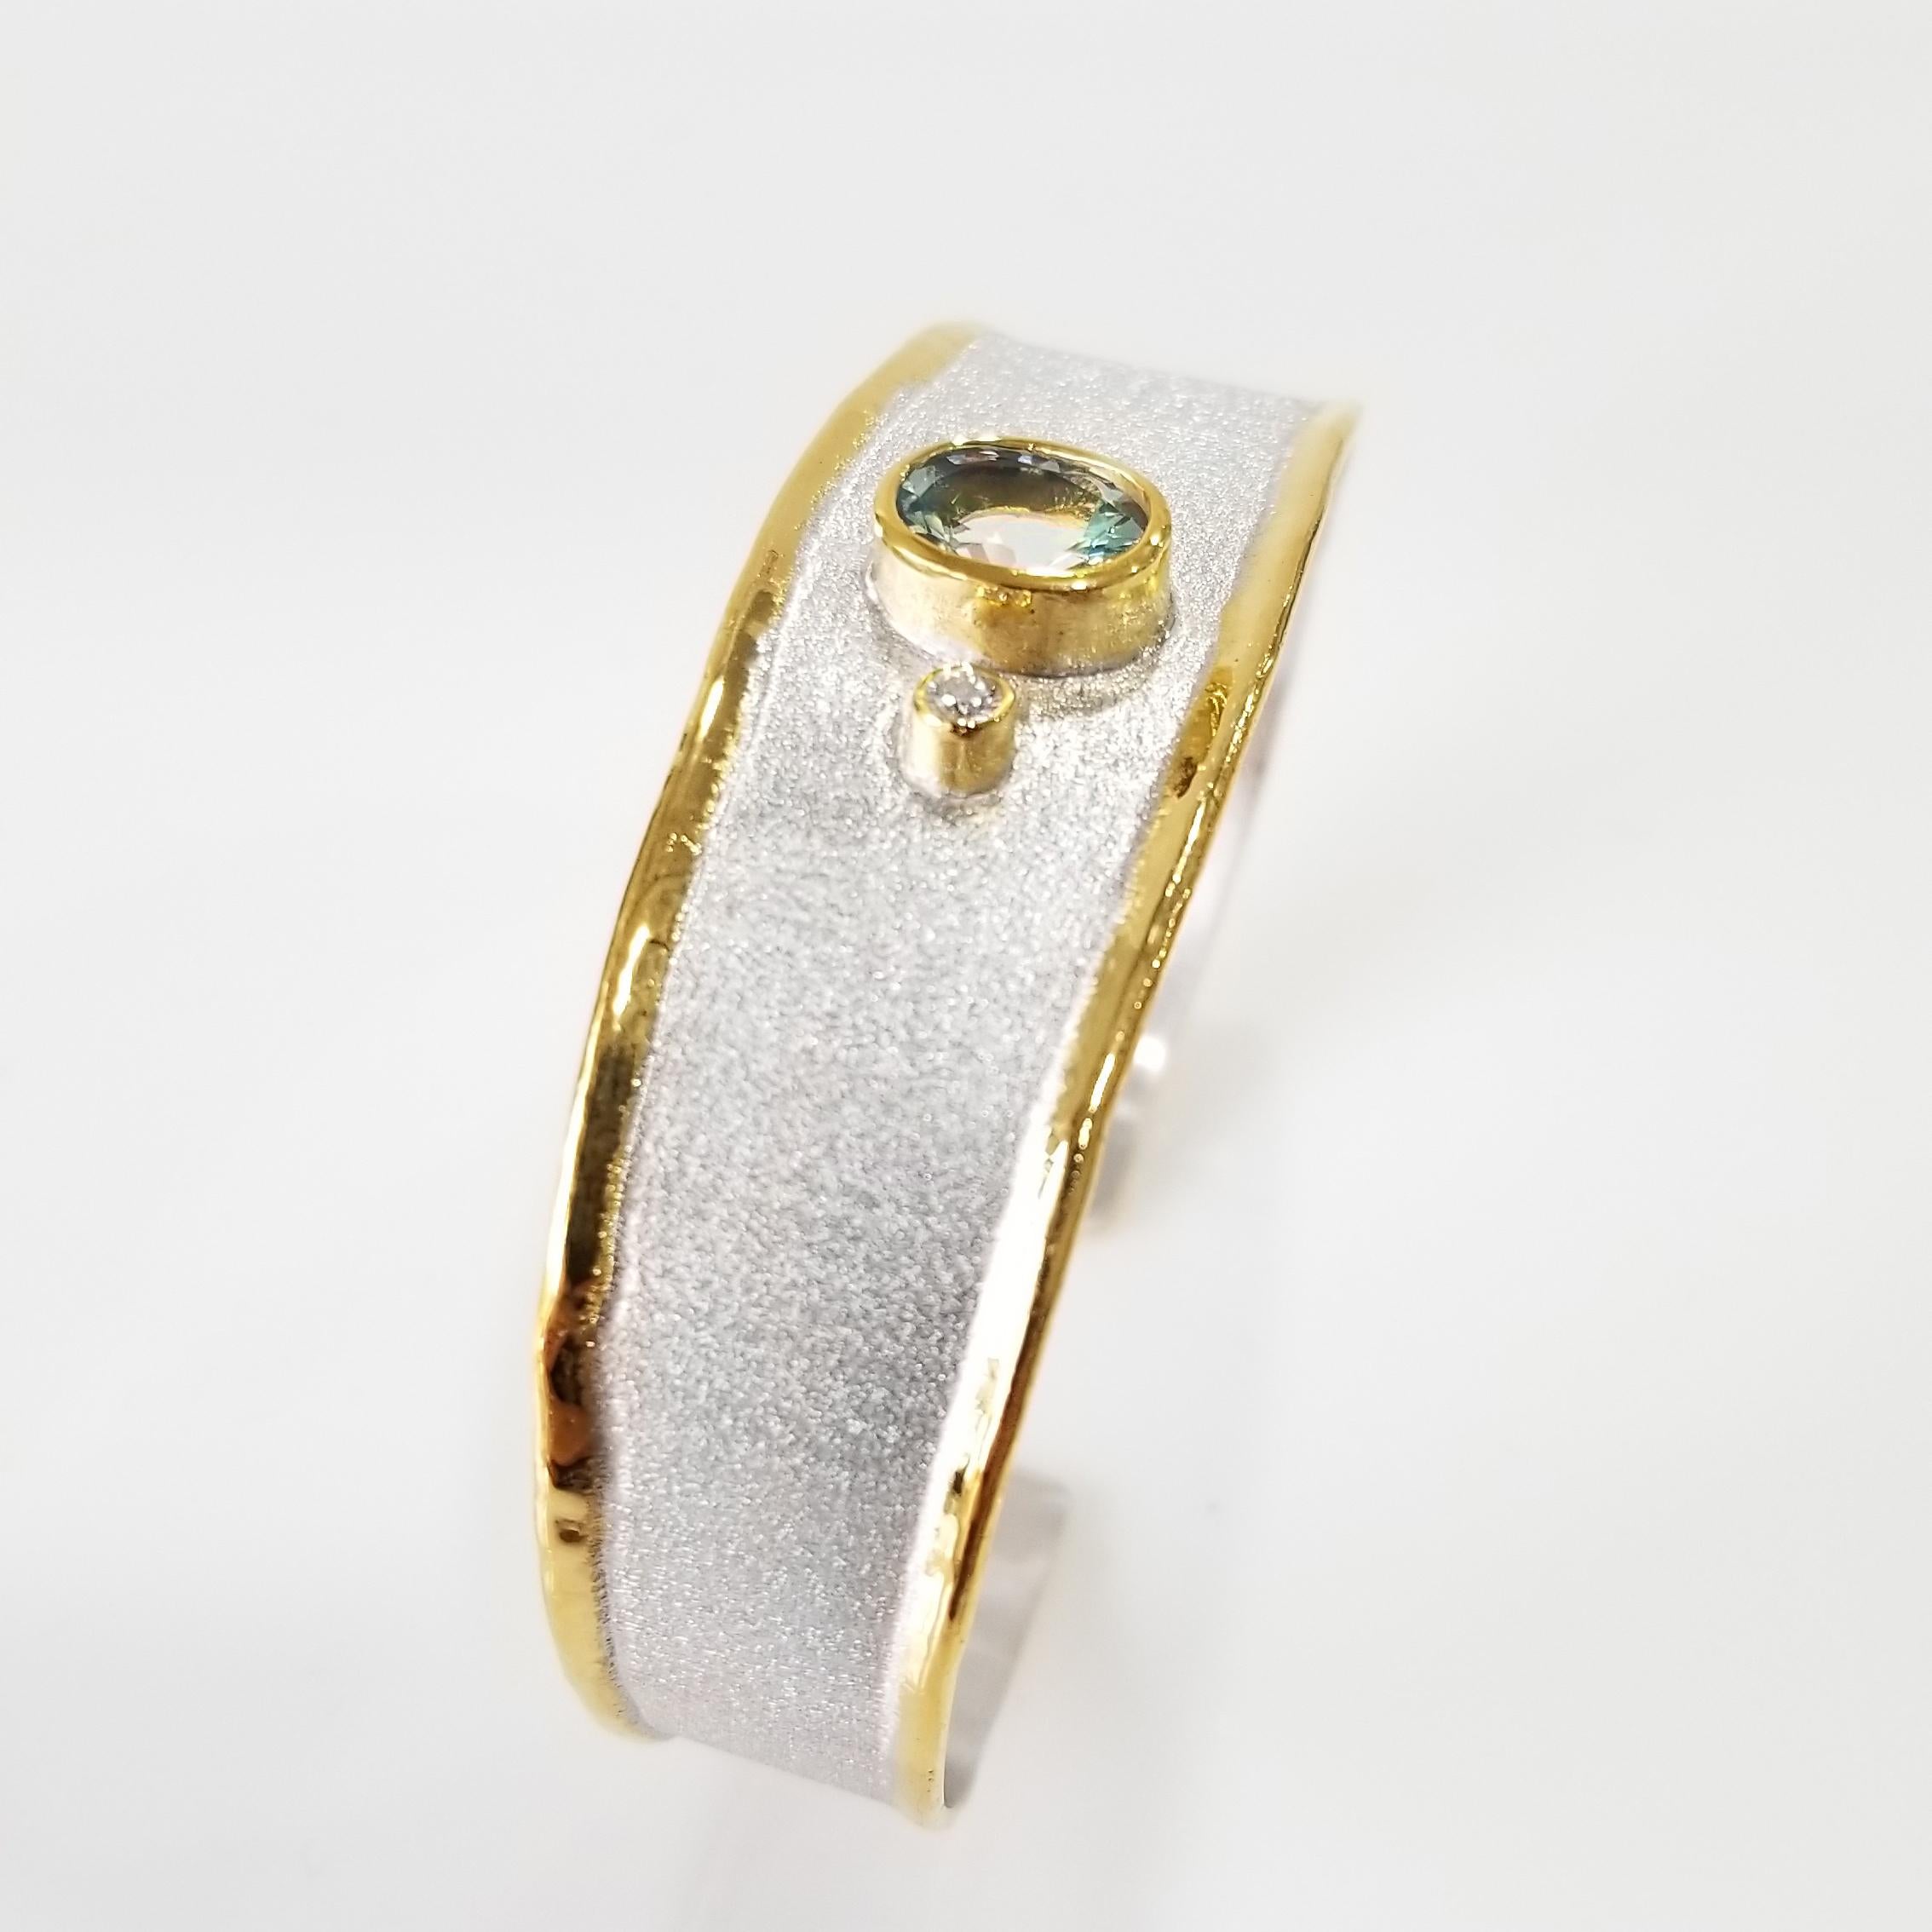 Presenting Yianni Creations bangle cuff bracelet from Midas Collection all handcrafted from fine silver 950 purity and plated with palladium to resist the elements. This gorgeous artisan bracelet features a 1.60 Carat oval shape natural Aquamarine